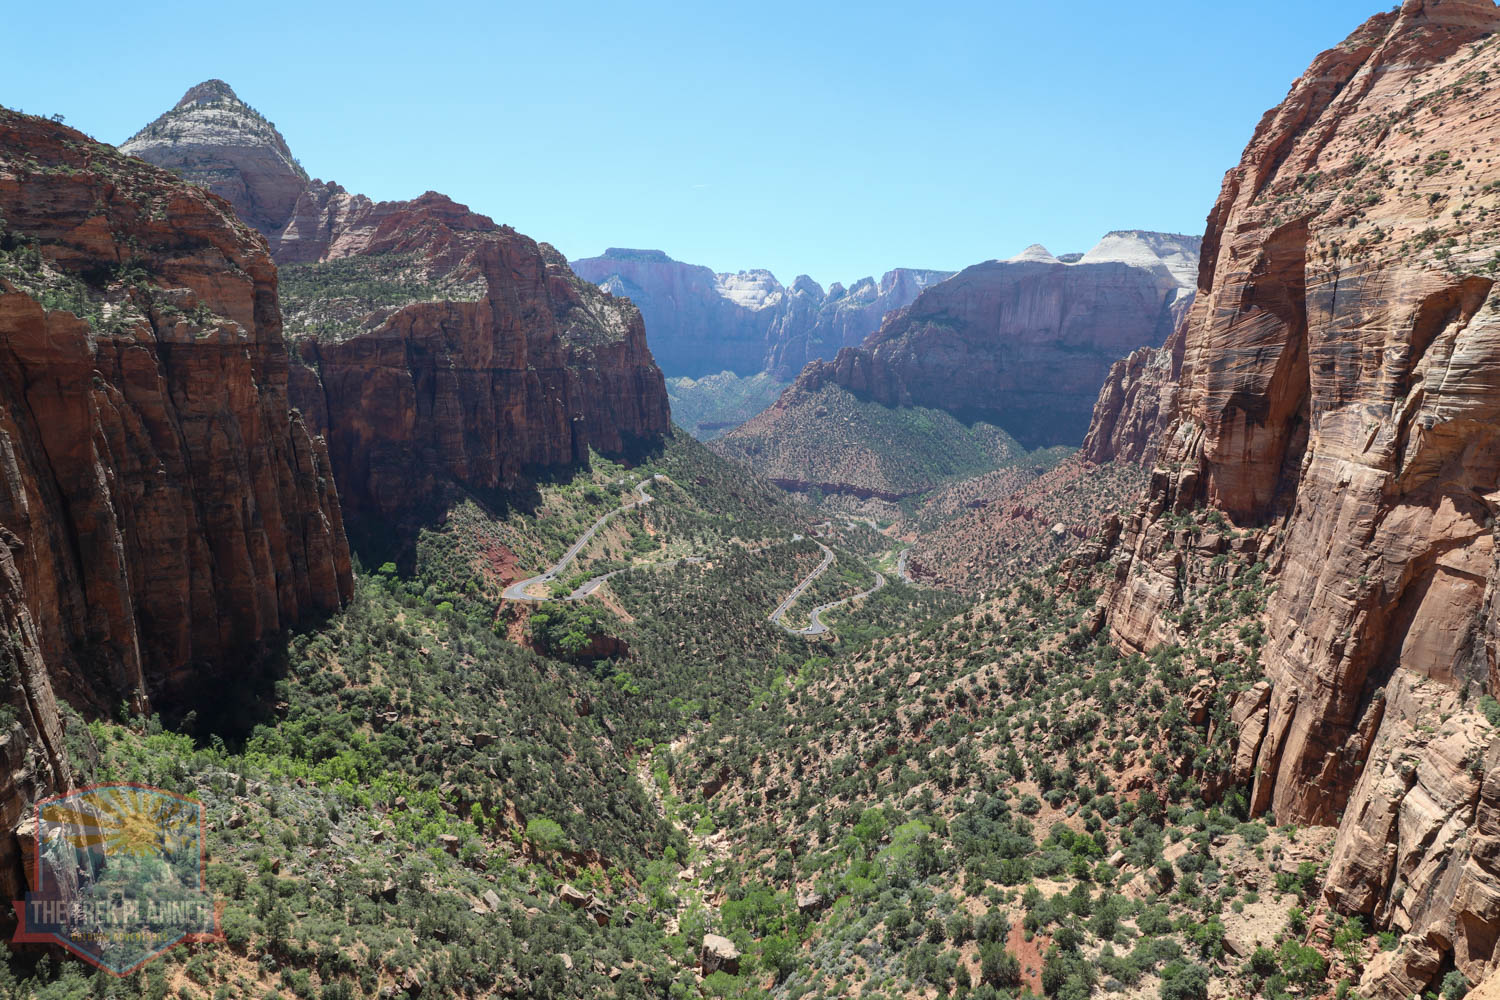 Hiking Zion Canyon Overlook Trail